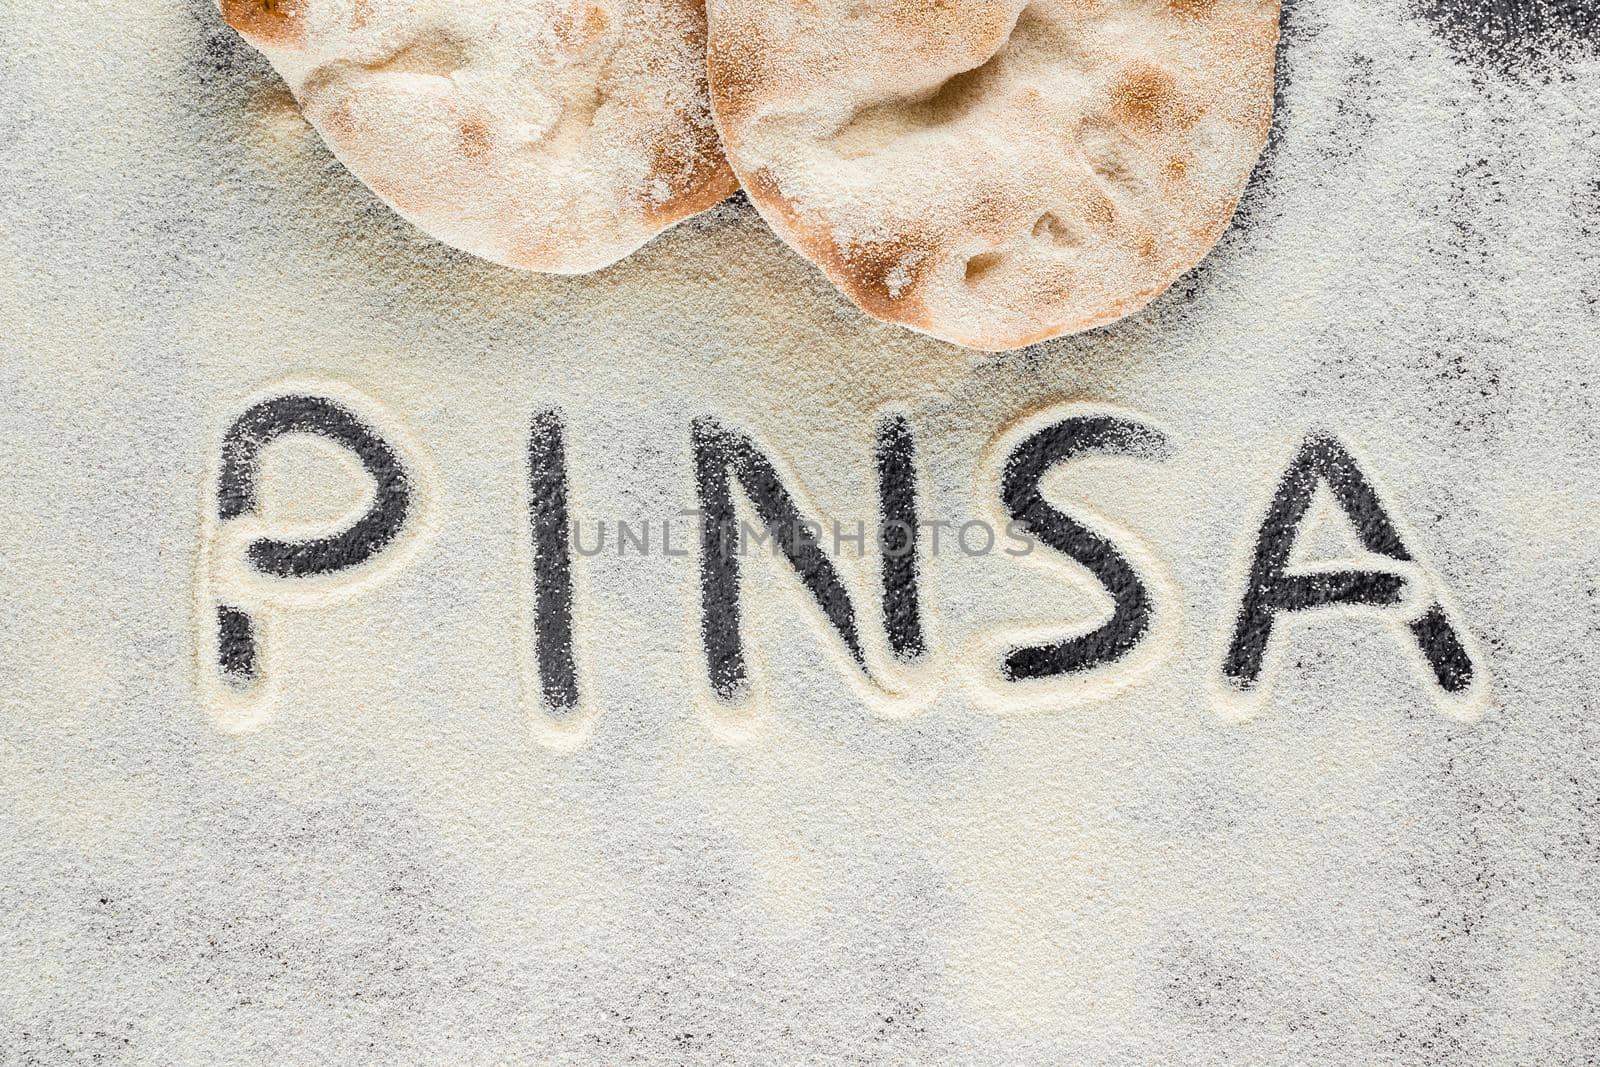 Dough and flour with text pinsa on black background. Pinsa romana and scrocchiarella gourmet italian cuisine. Traditional dish in italy